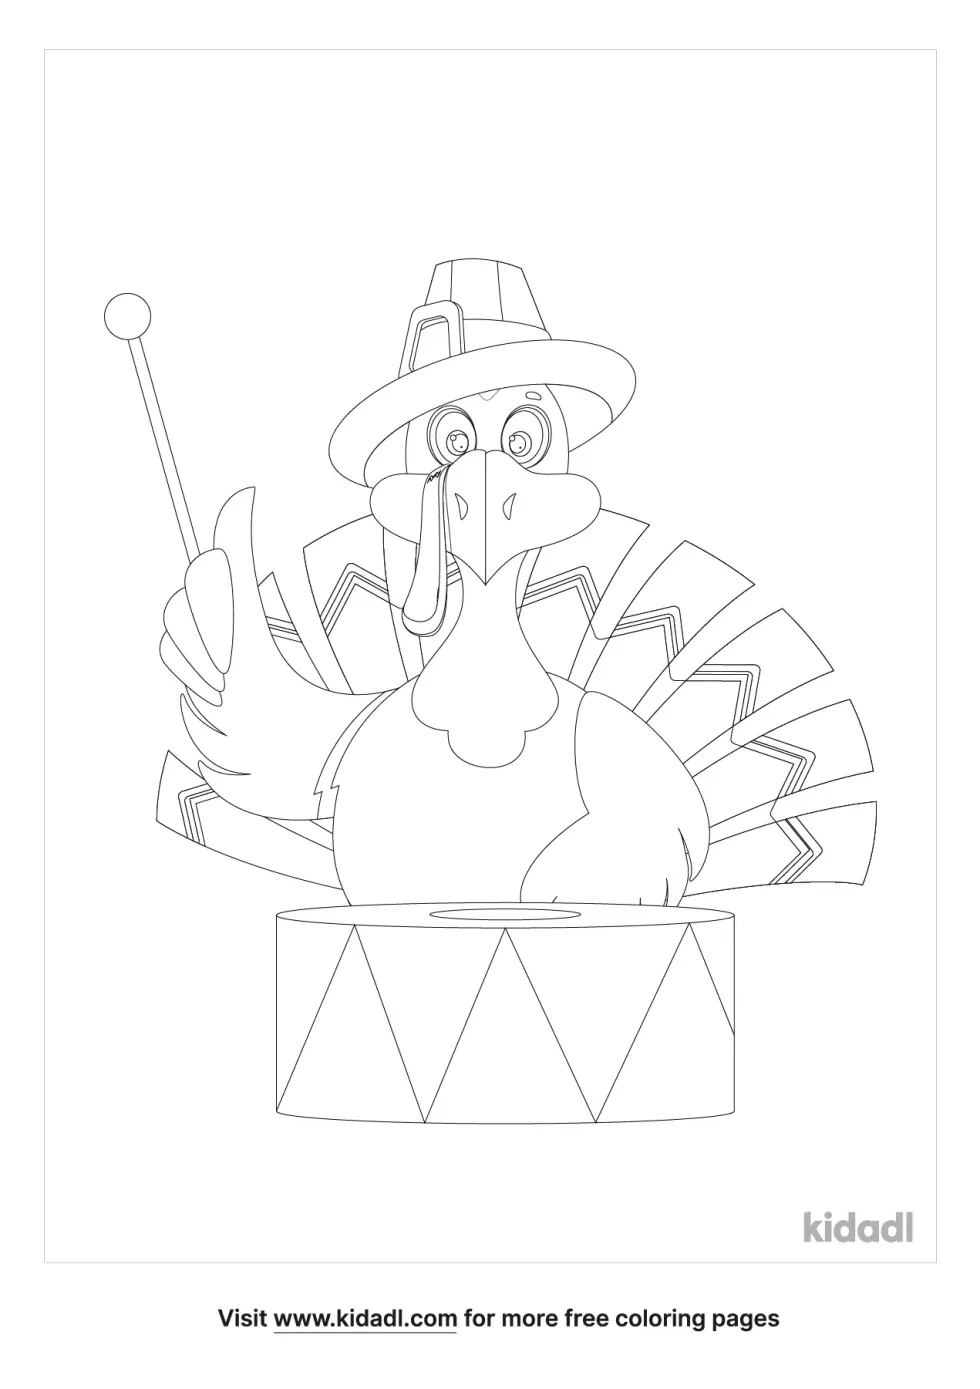 Turkey Playing A Musical Instrument